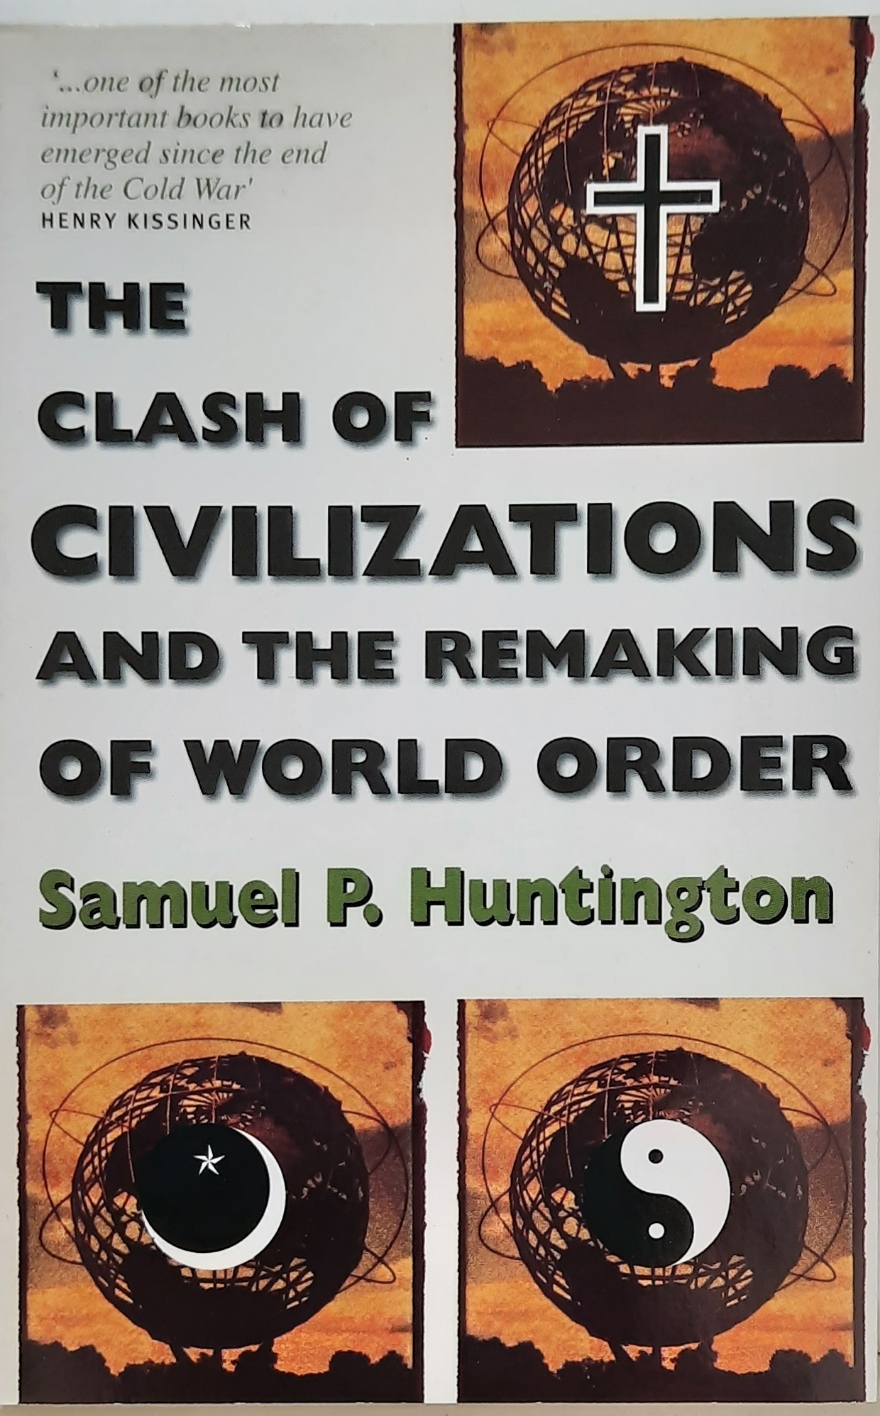 Book cover 19960161: HUNTINGTON Samuel P. | The clash of civilizations and the remaking of world order 